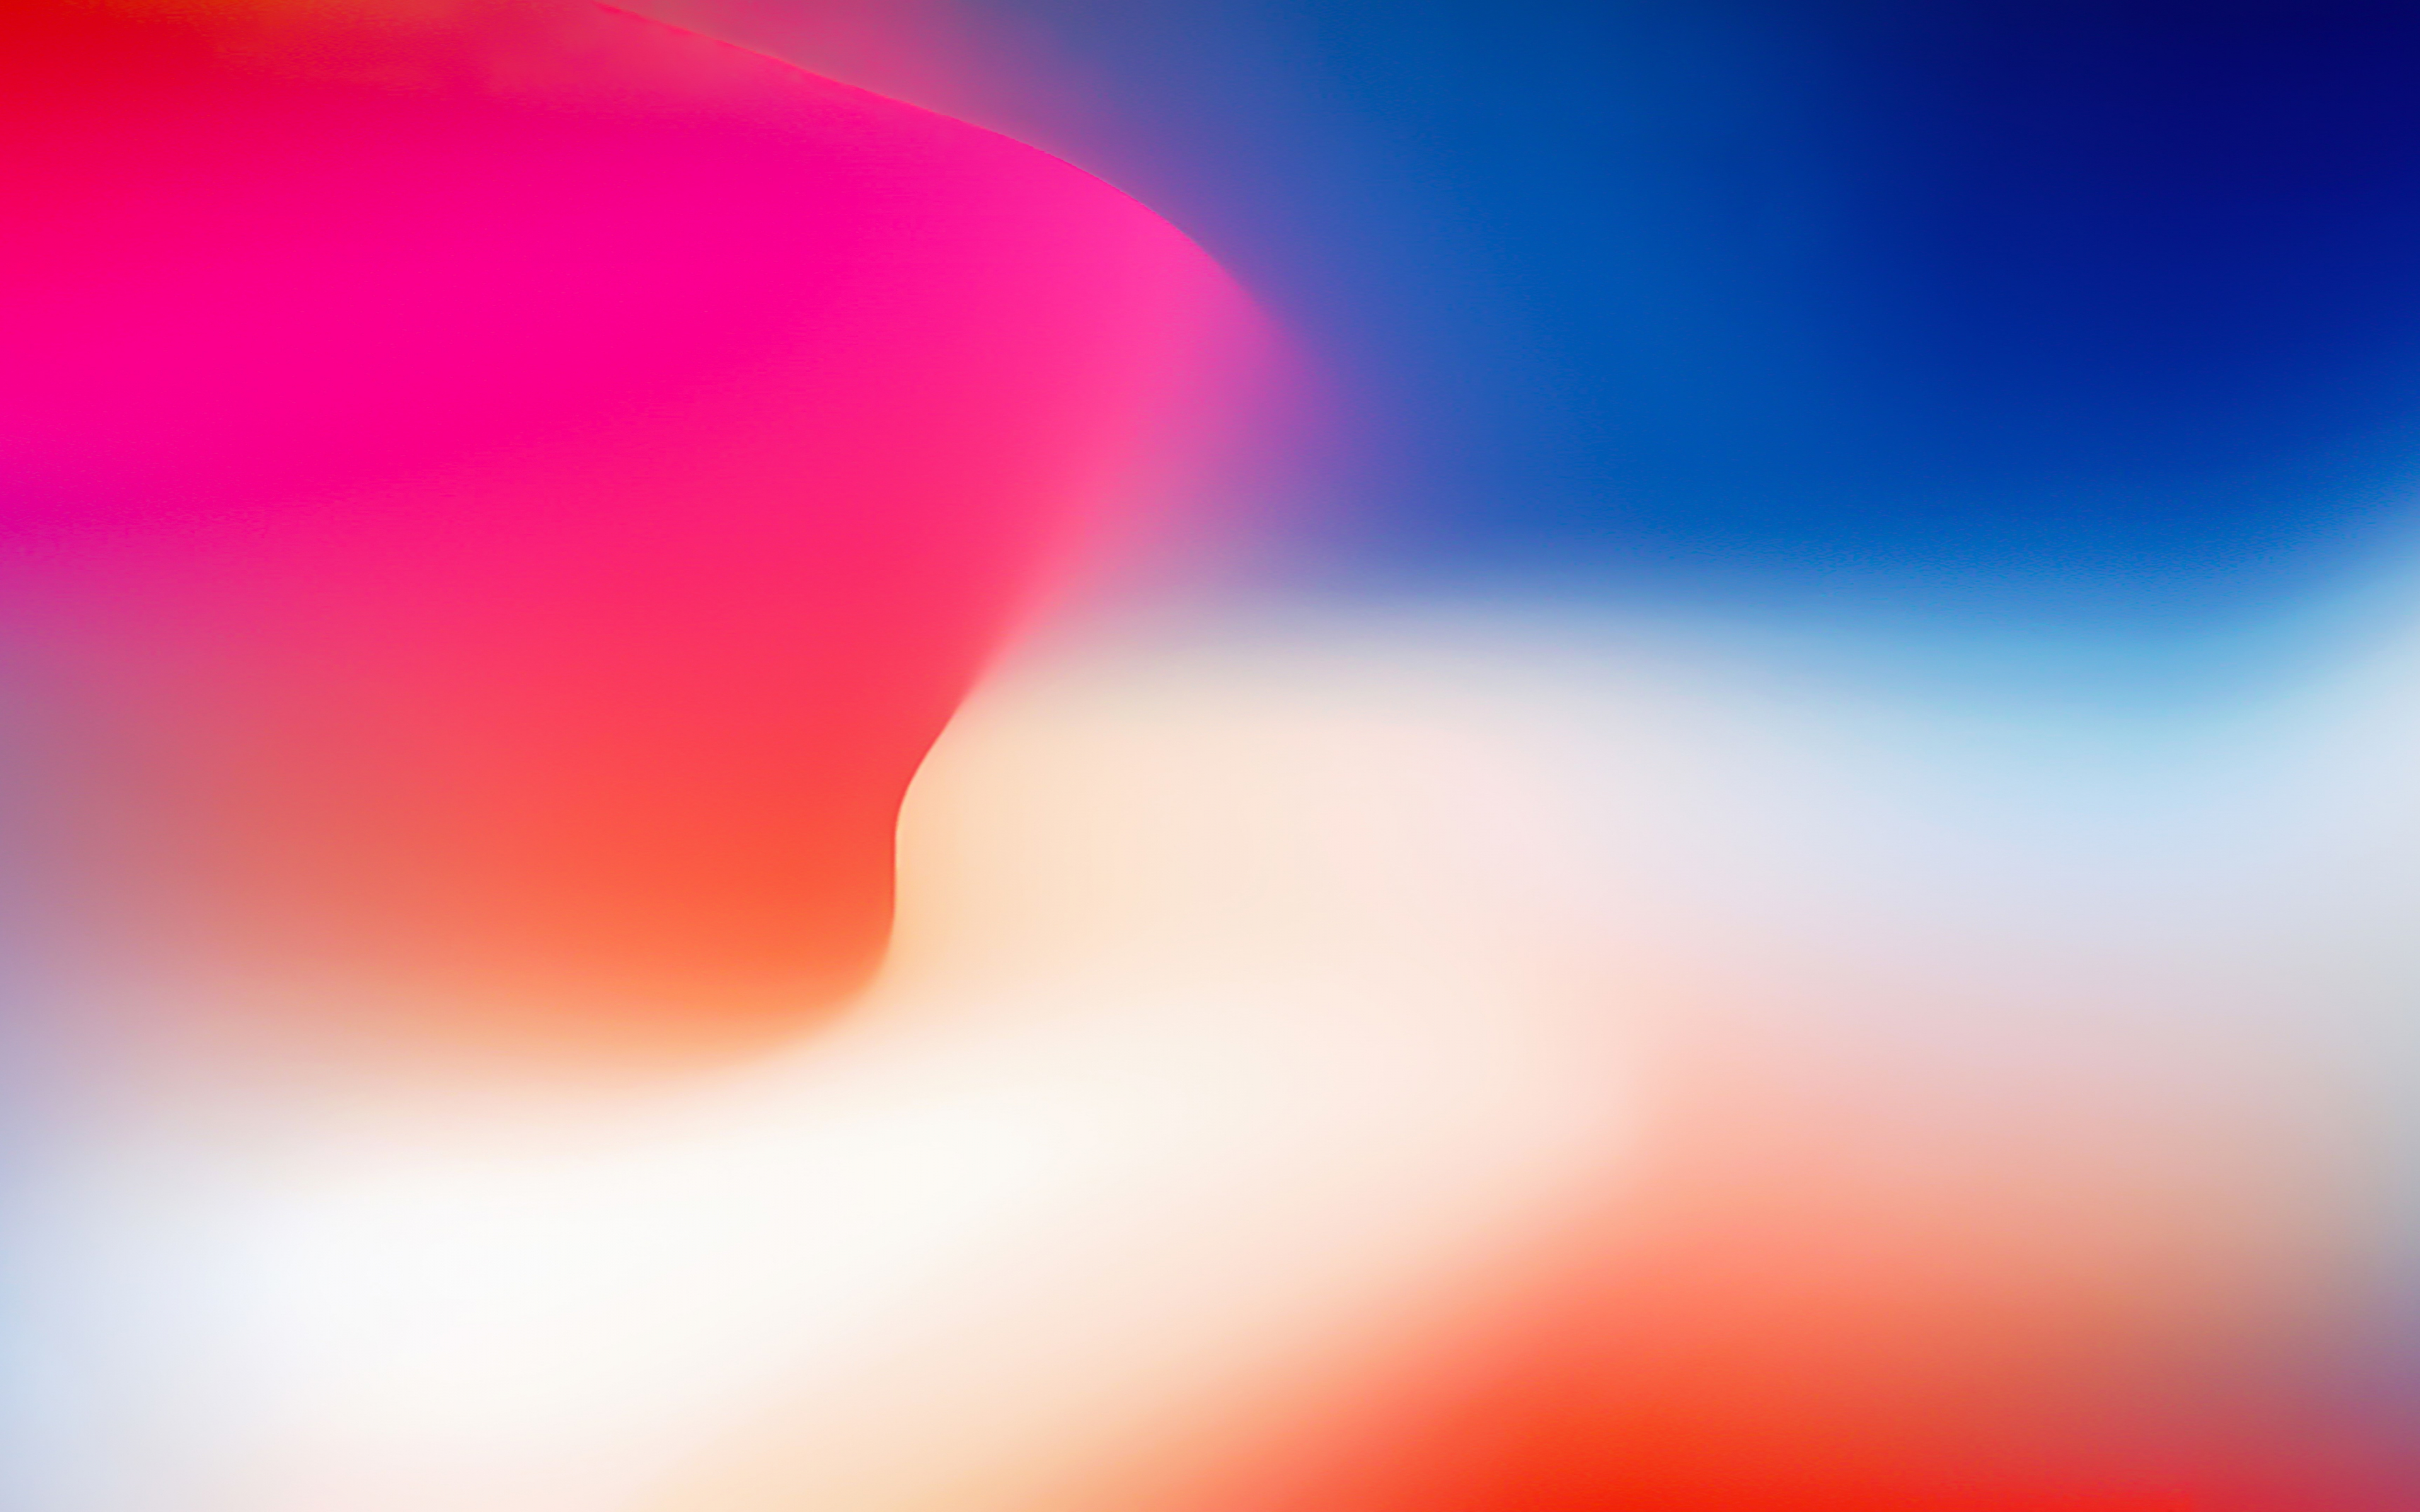 Download 3840x2400 Wallpaper Iphone X Stock Colorful Gradient Abstract 4k Ultra Hd 16 10 Widescreen 3840x2400 Hd Image Background 1317